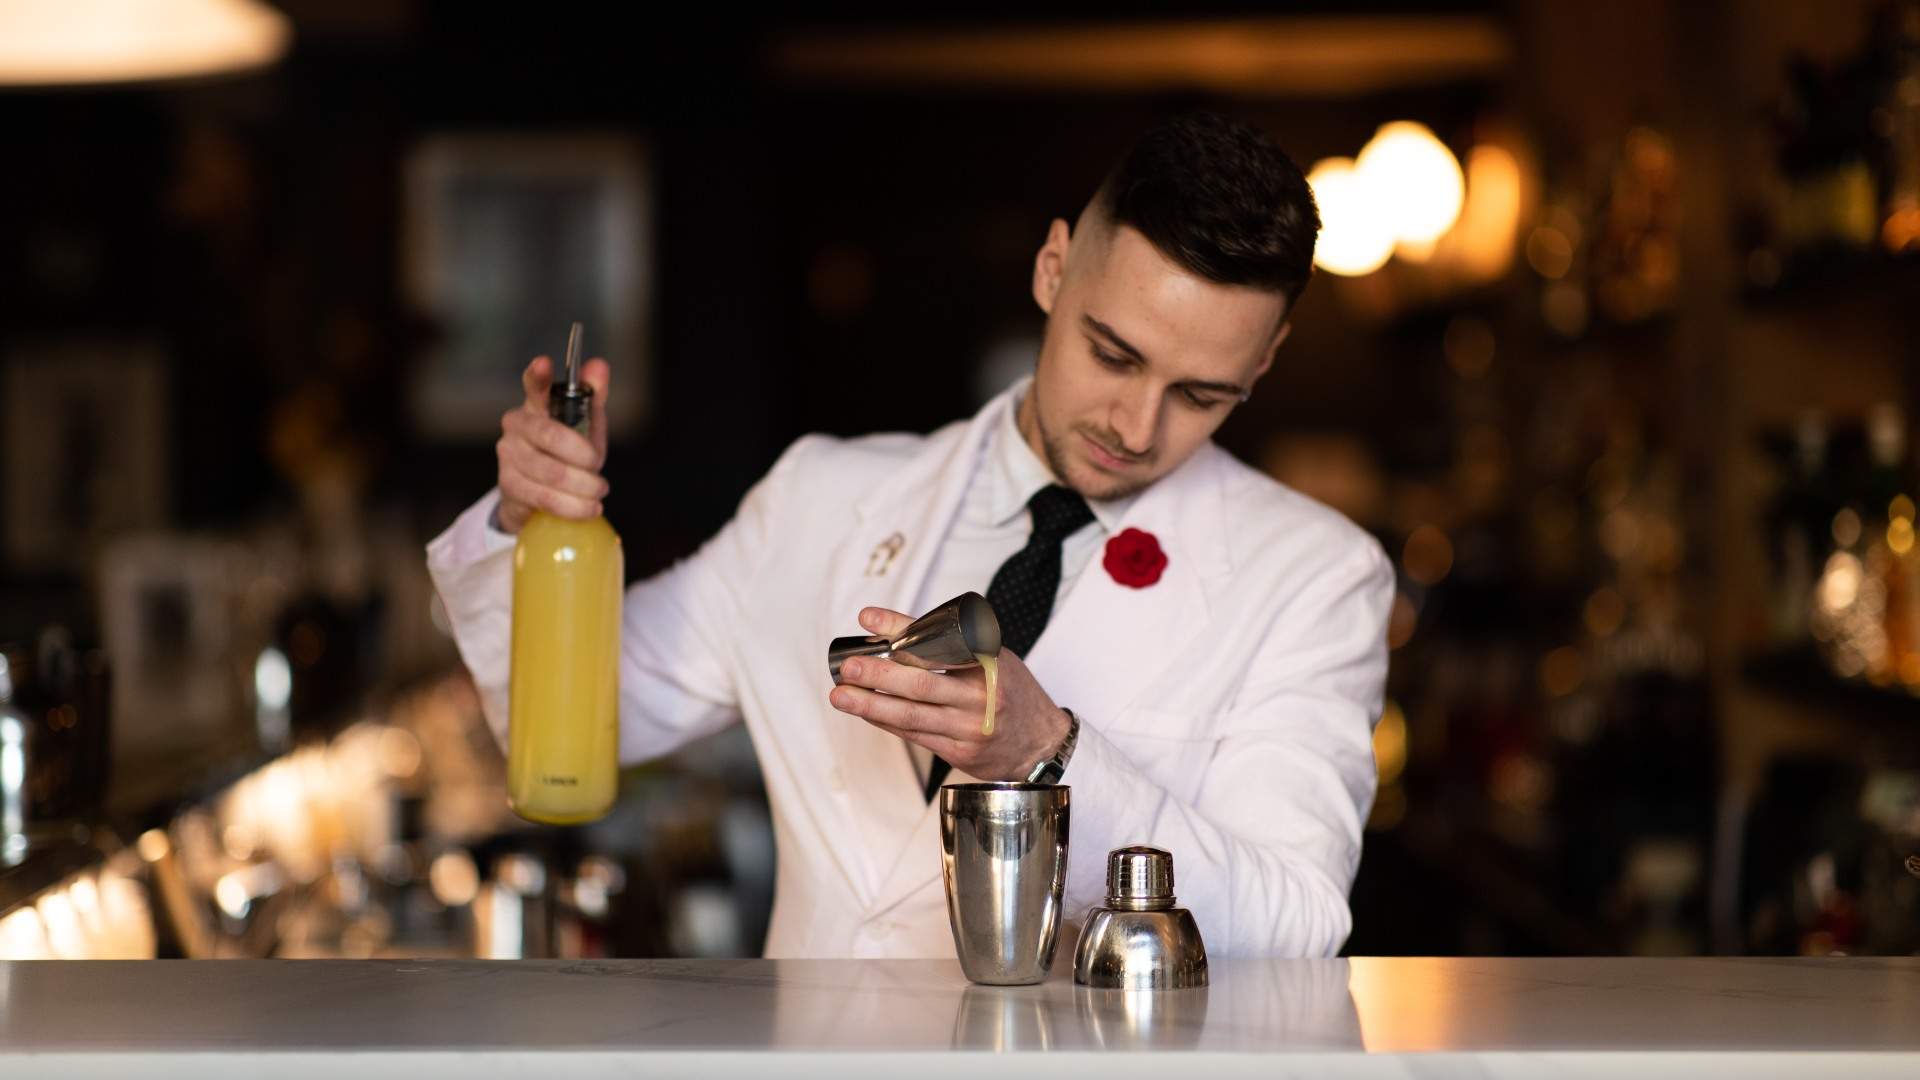 More Cocktails Please: Australia's Best 100 Bartenders for 2022 Have Been Revealed